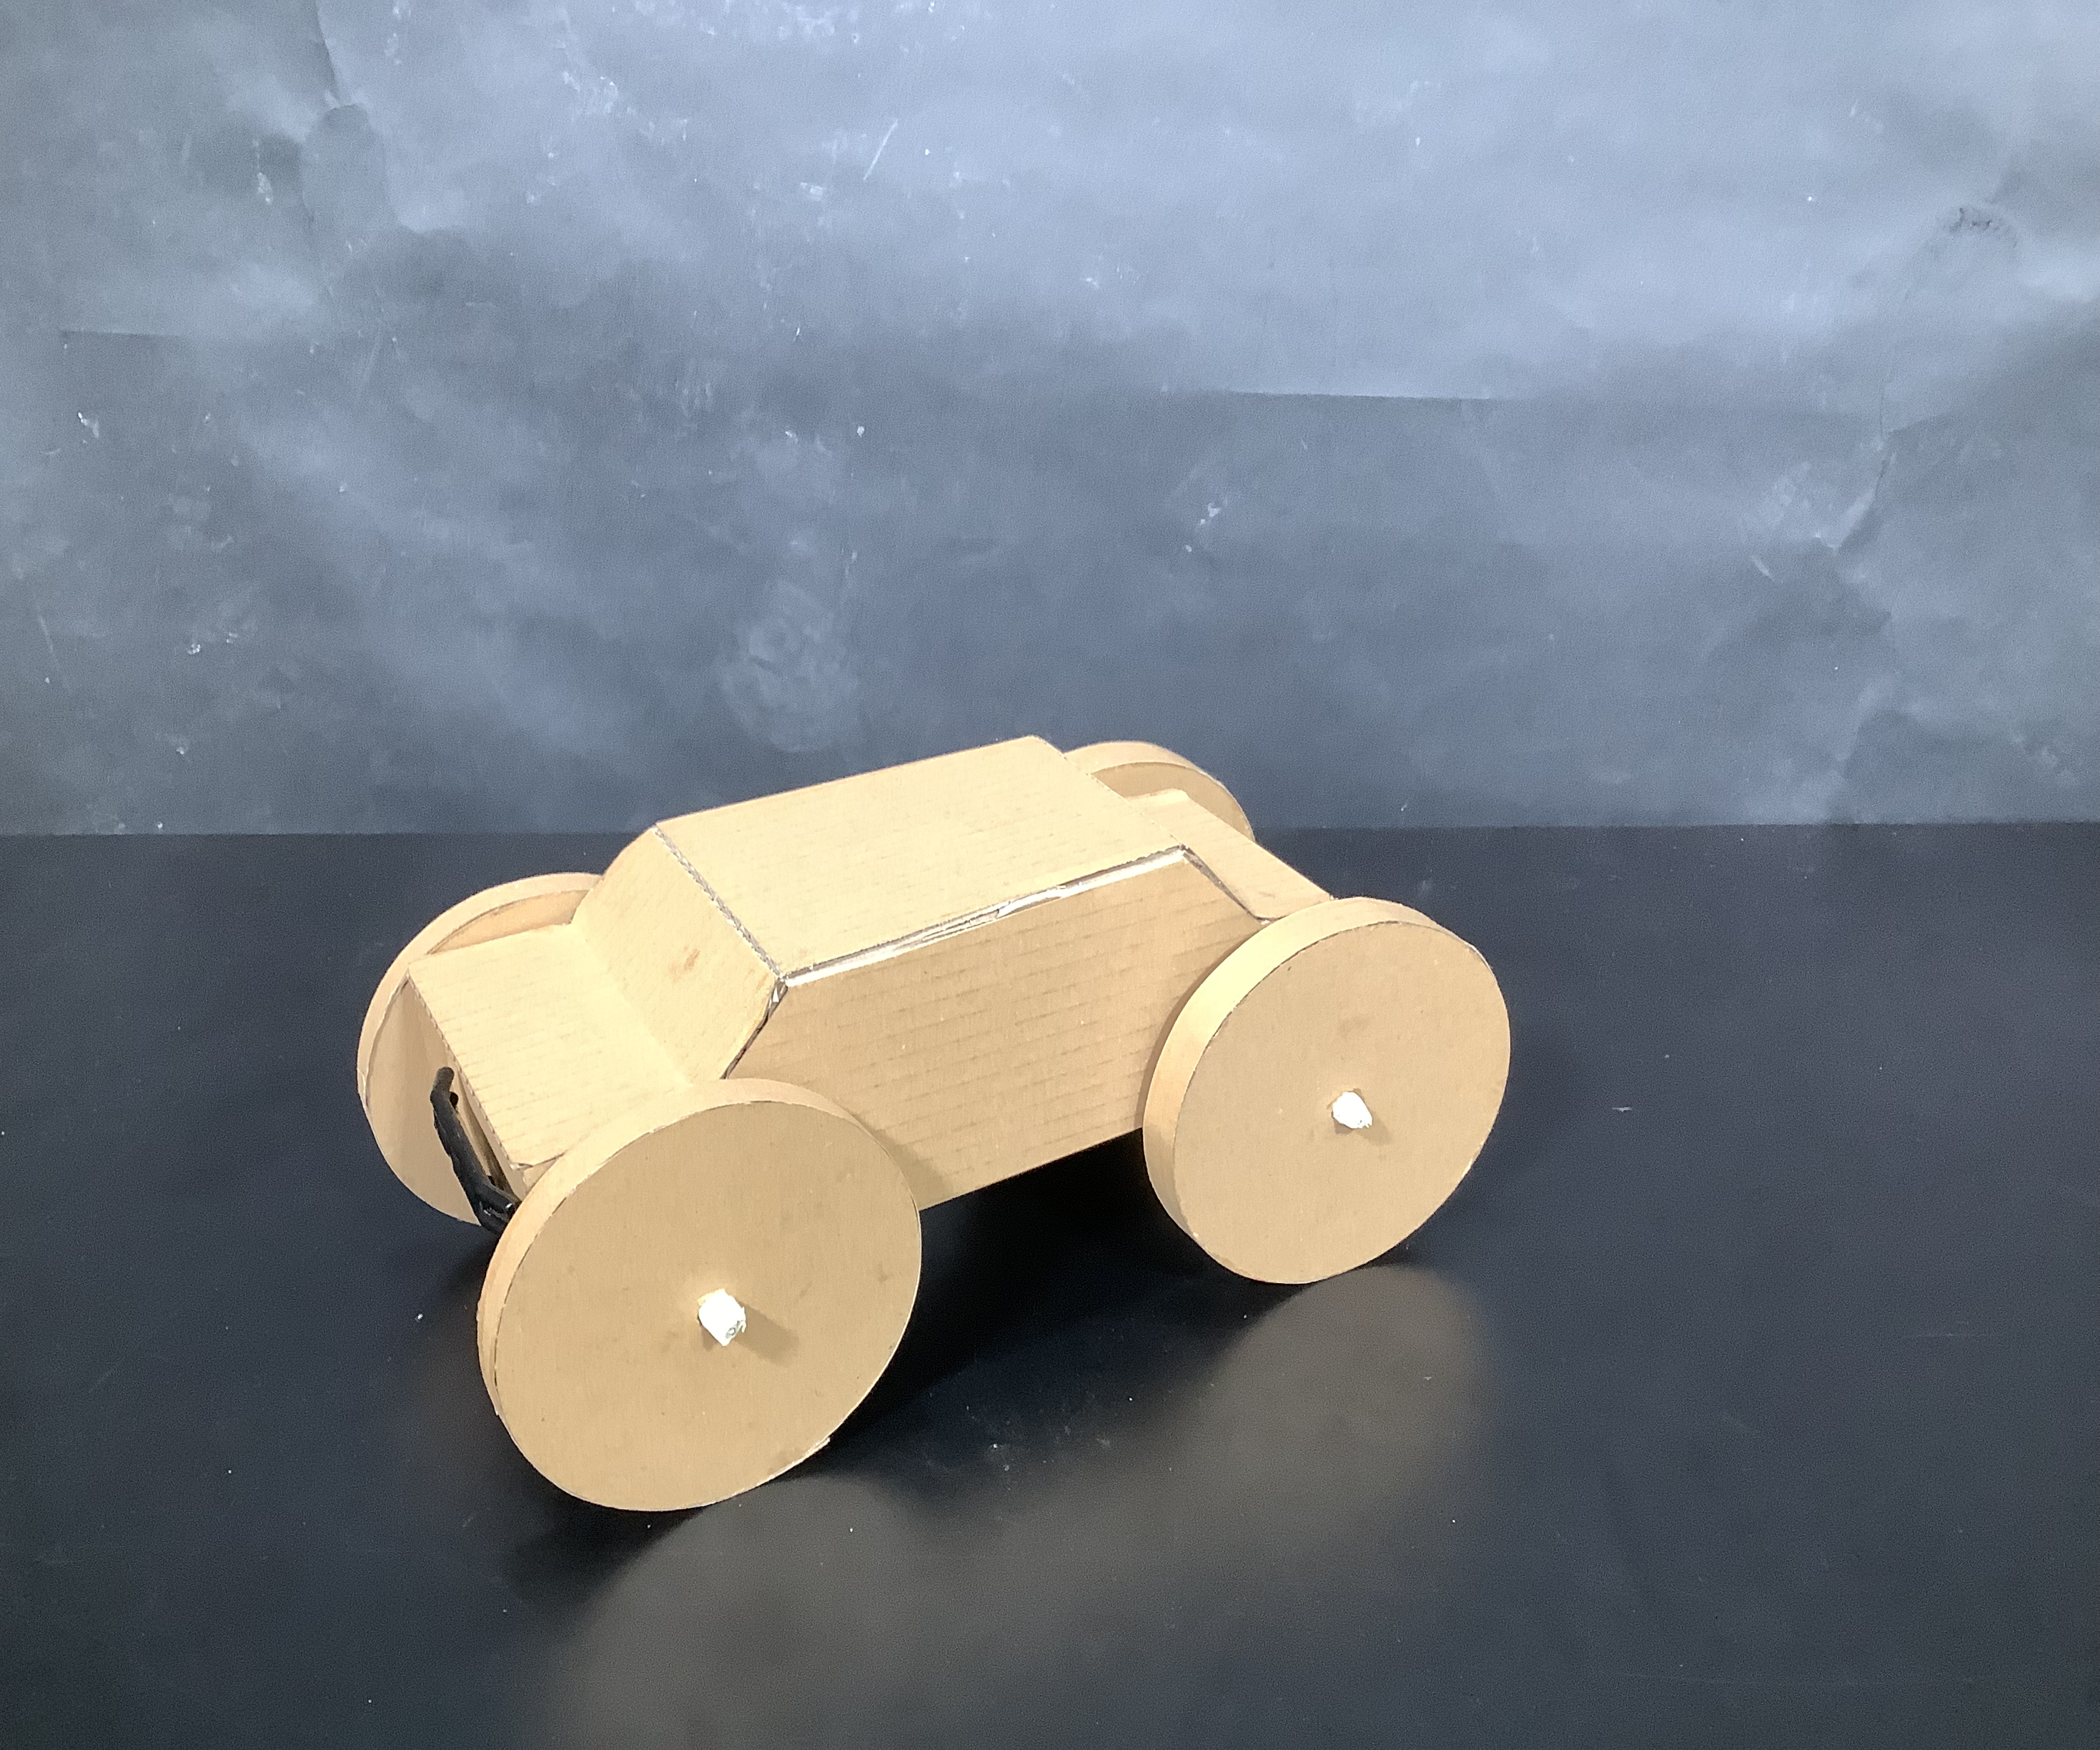 Remote Controlled Car Modelling (Physical Modelling With Cardboard)